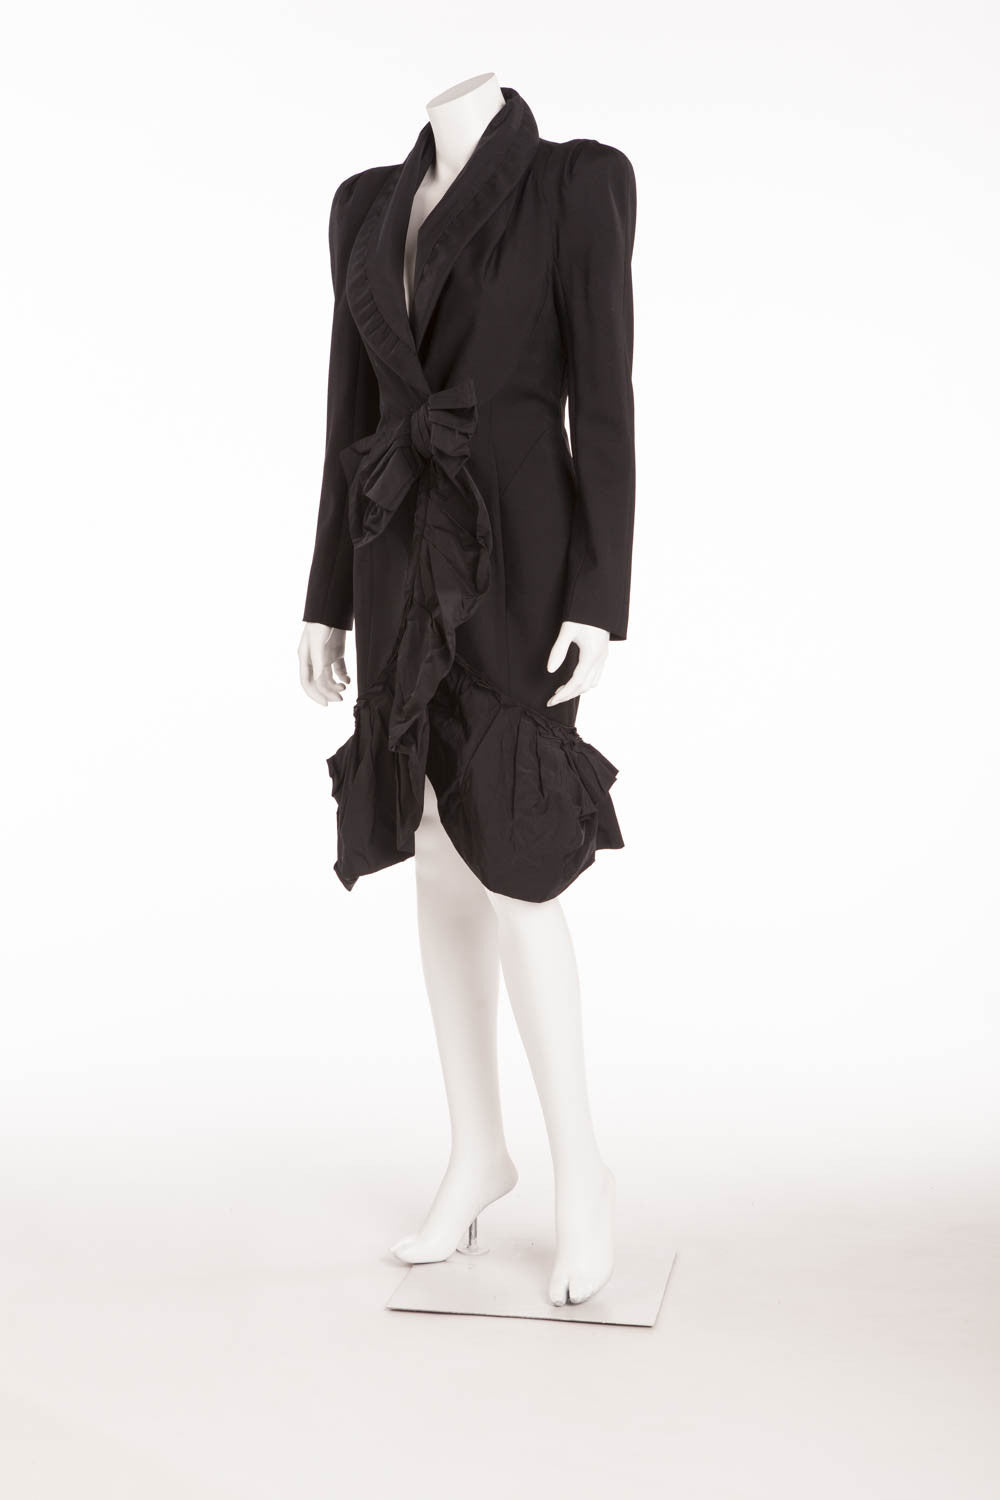 Louis Vuitton - Black Coat with Ruffle On Bottom - FR 38 – LUXHAVE